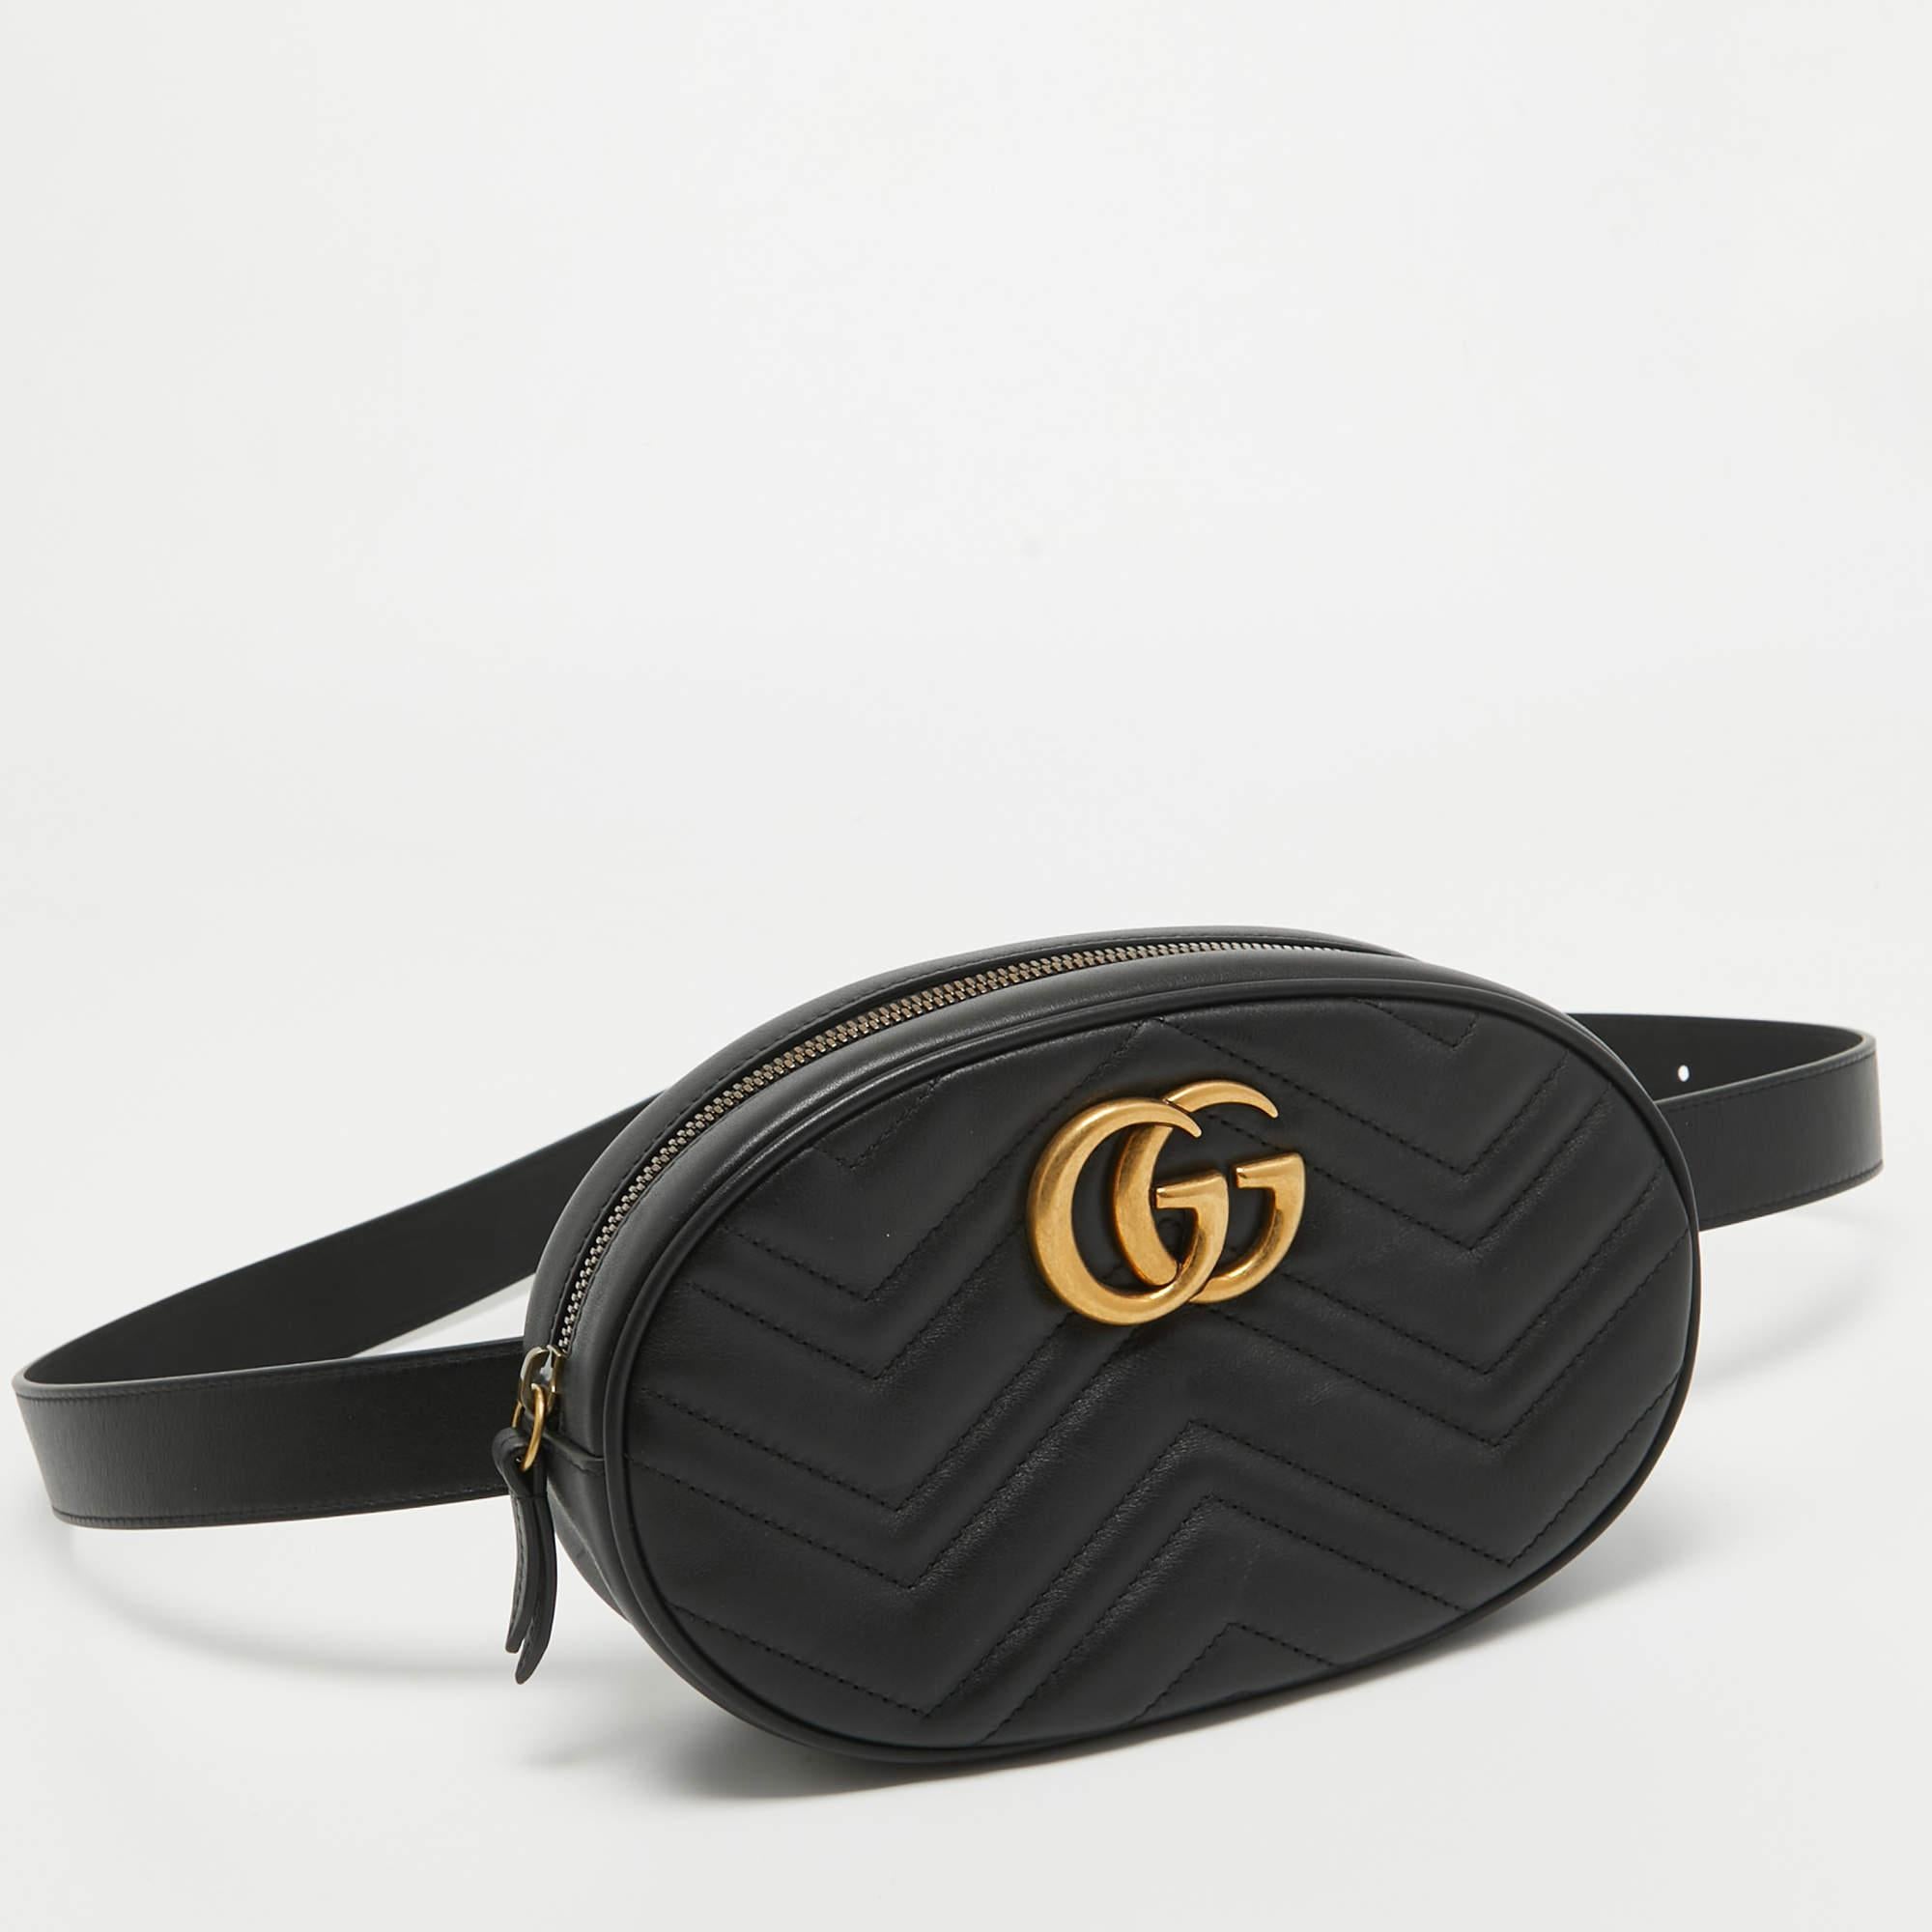 The Gucci belt bag is a luxurious accessory featuring signature matelassé quilting and the iconic GG logo. Crafted from black leather, it boasts a stylish belt design for versatile wear and a spacious compartment for essentials, combining fashion